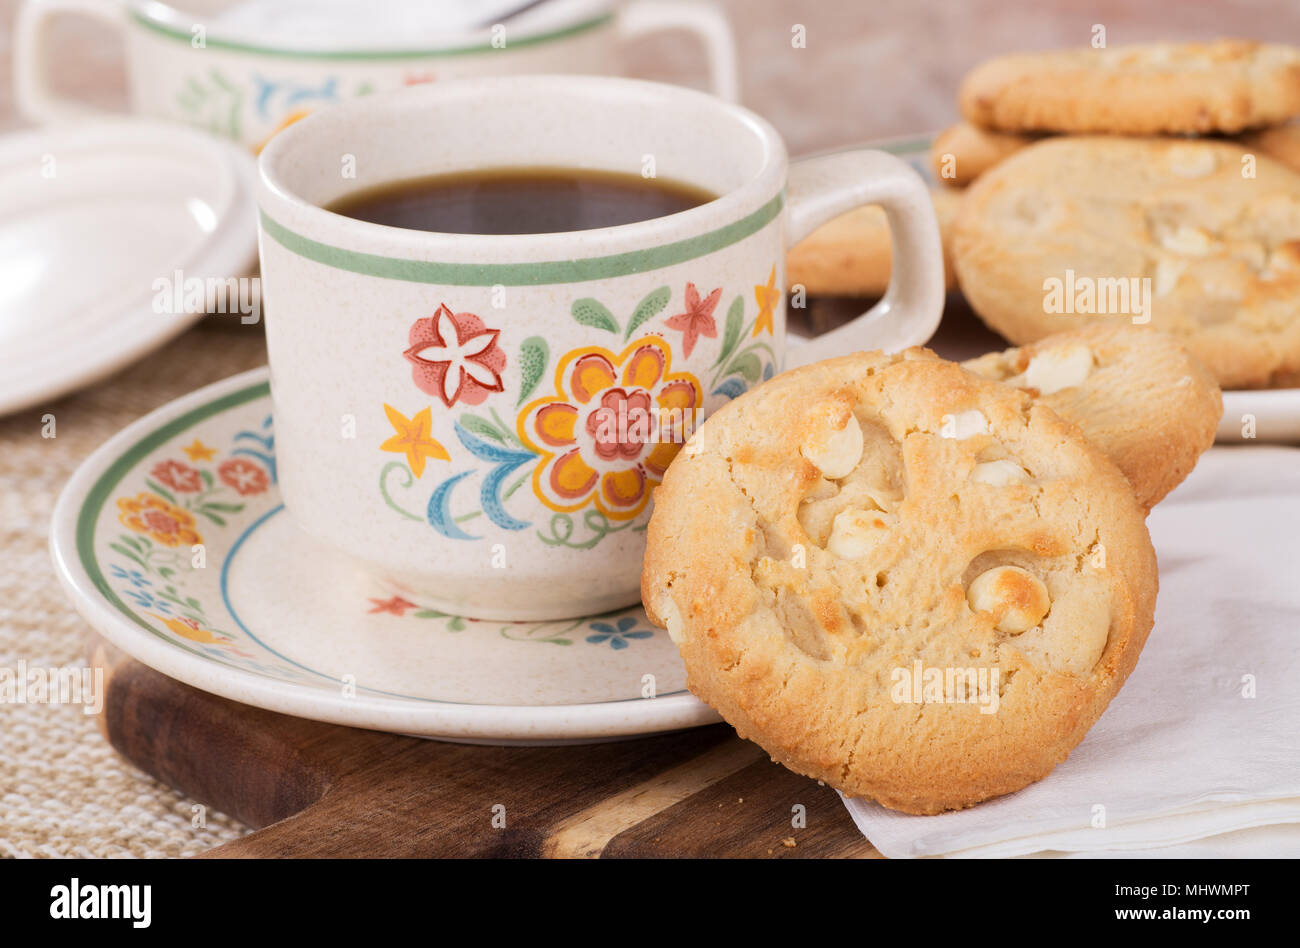 White chocolate macadamia cookies and cup of coffee on a plate with a plate of cookies and bowl of sugar in background Stock Photo